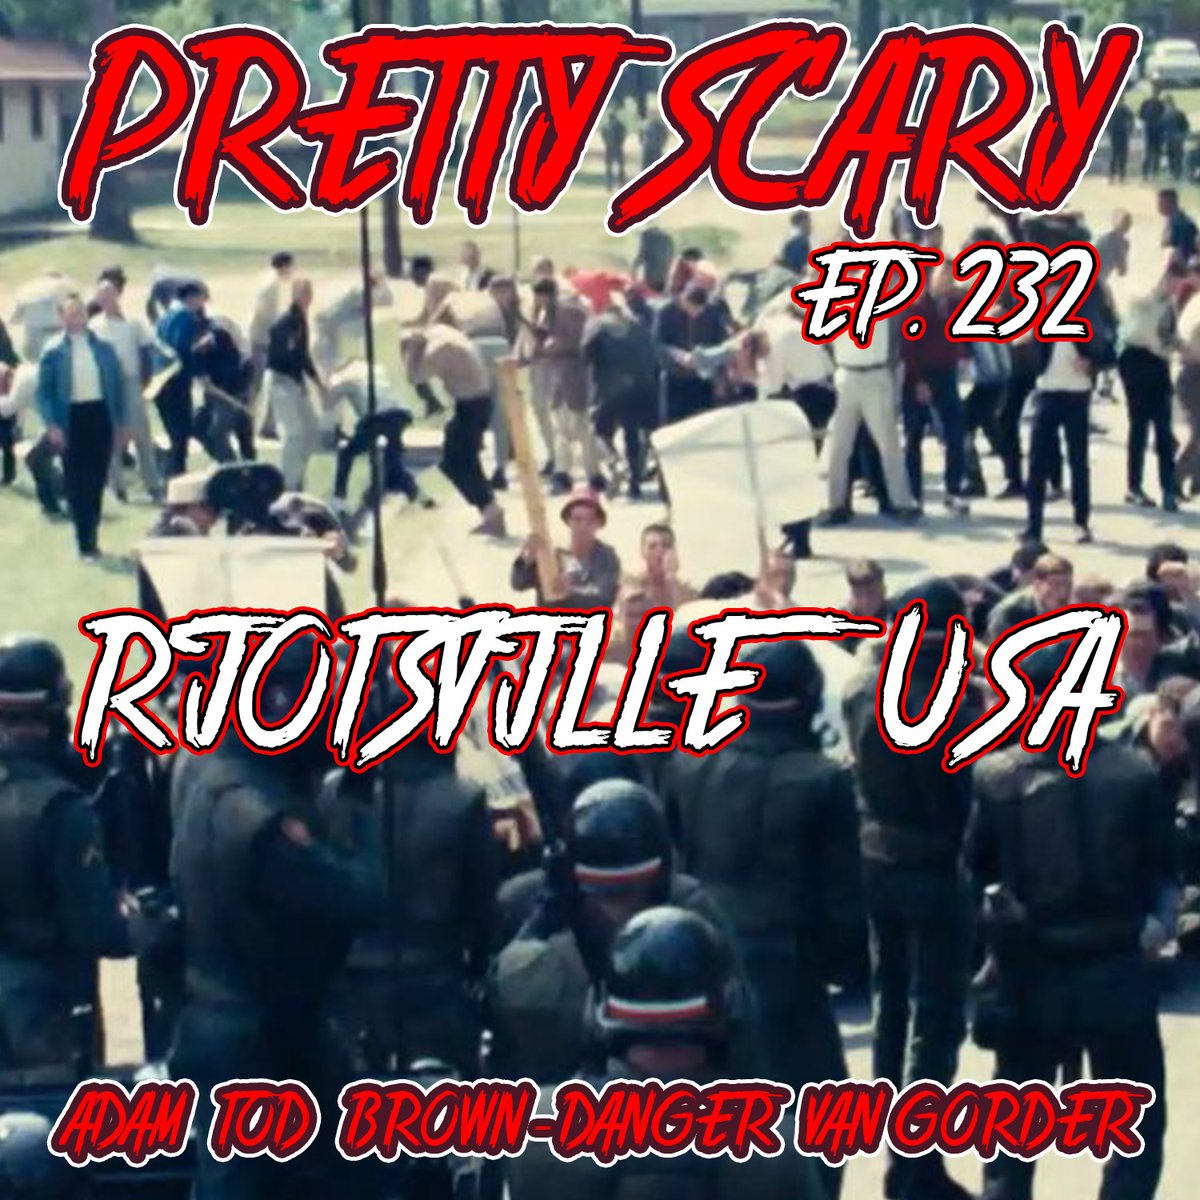 New episode up today! @adamtodbrown and special guest @Countless1000s discuss the documentary @riotsvilleusa and the #CopCity controversy. Get it at anchor.fm/prettyscary or wherever else you get your podcasts!